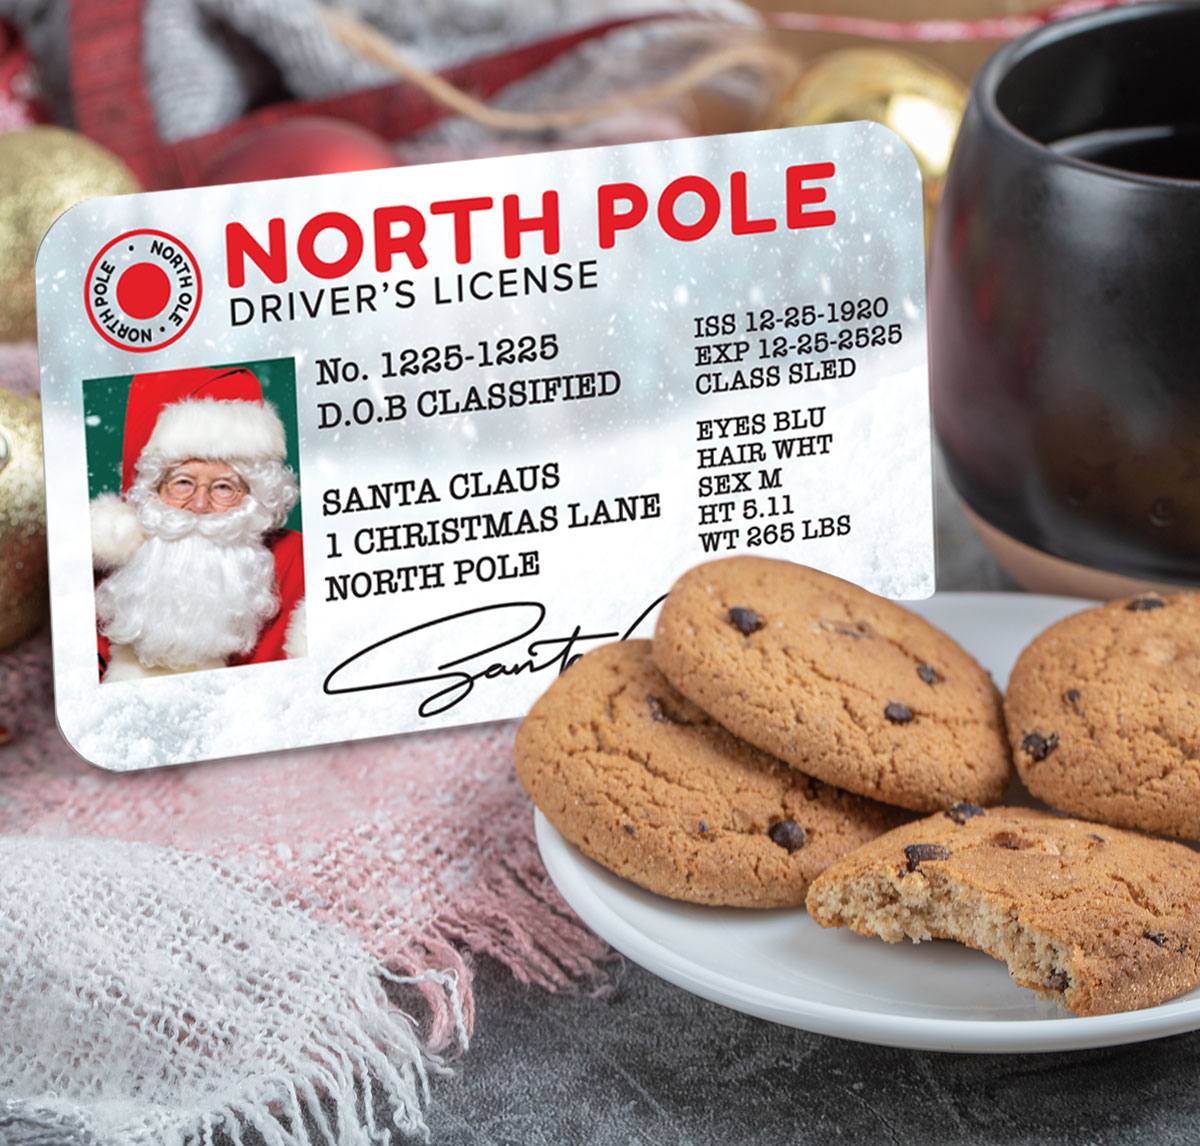 customized north pole driver's license sitting next to a plate of cookies